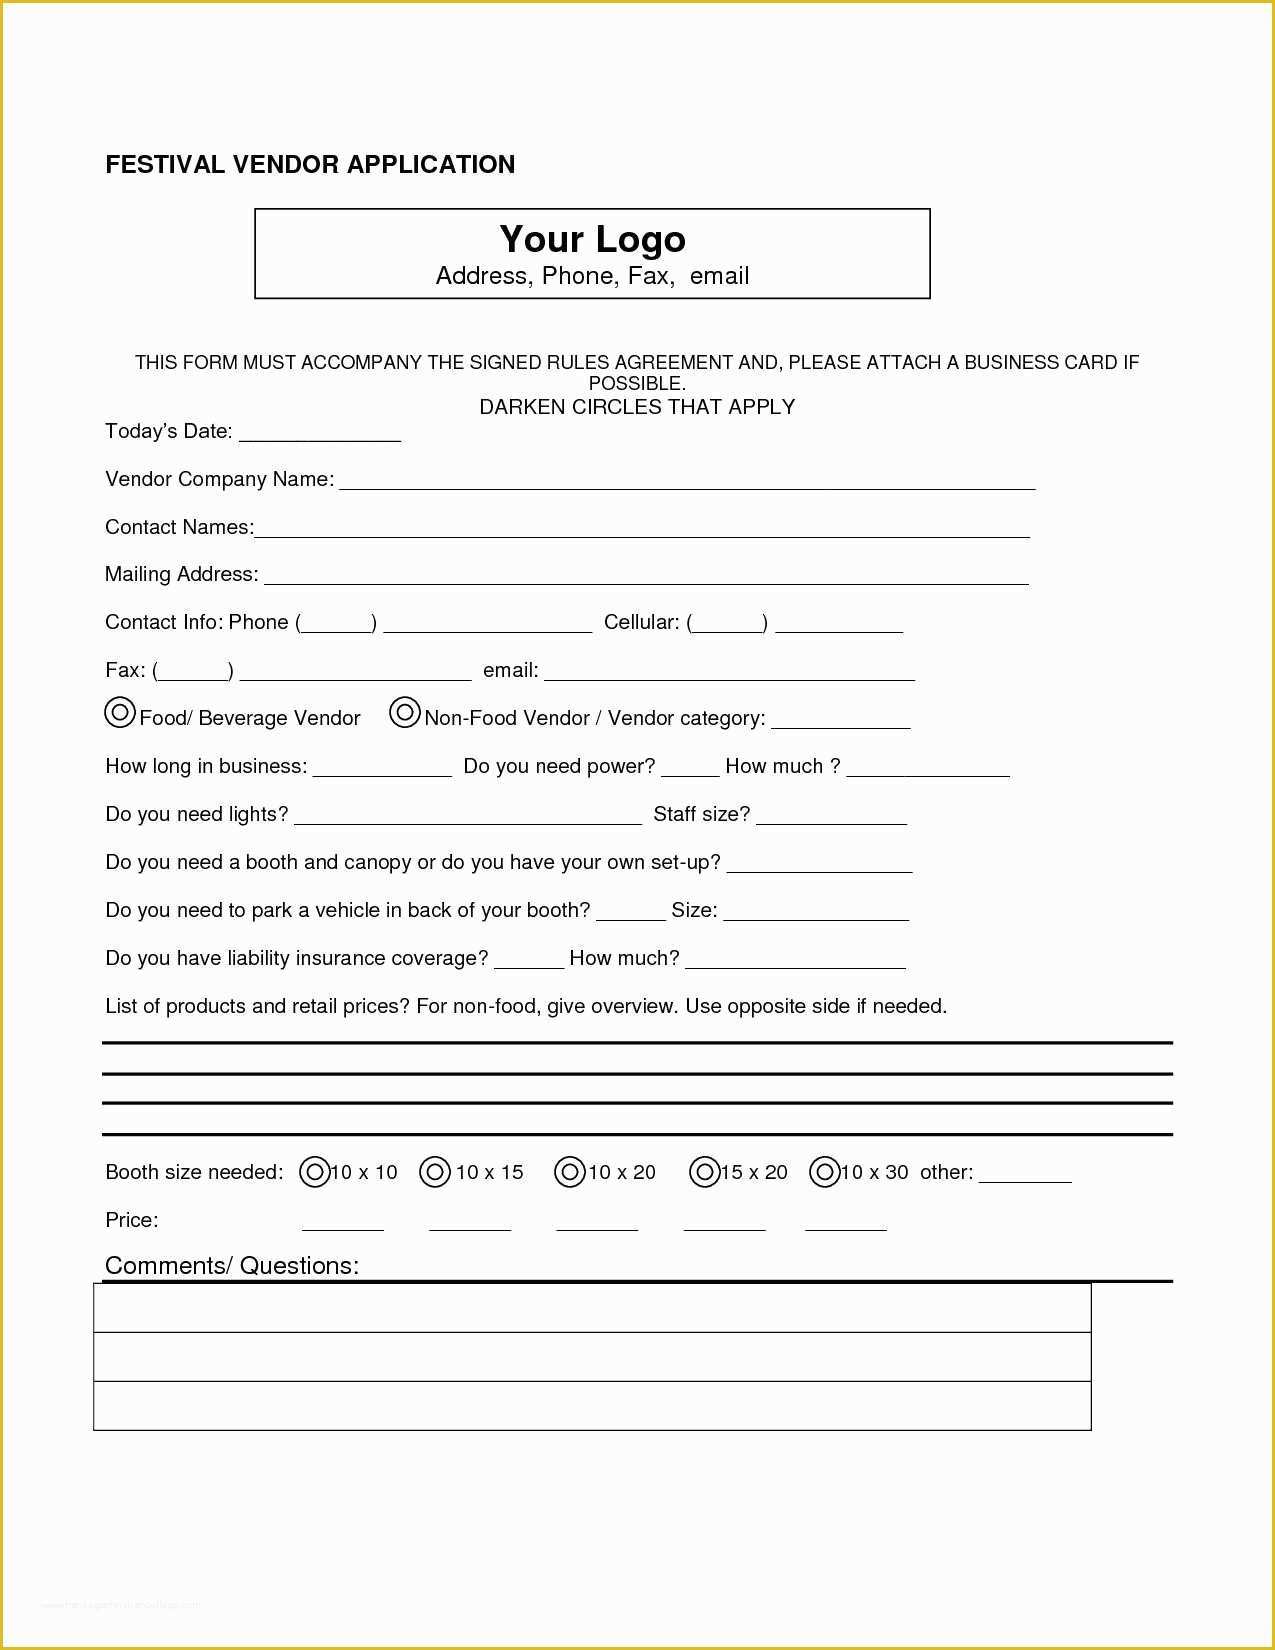 Free Vendor Contract Template Of Sample Vendor Contract Agreement Contracts Simple form